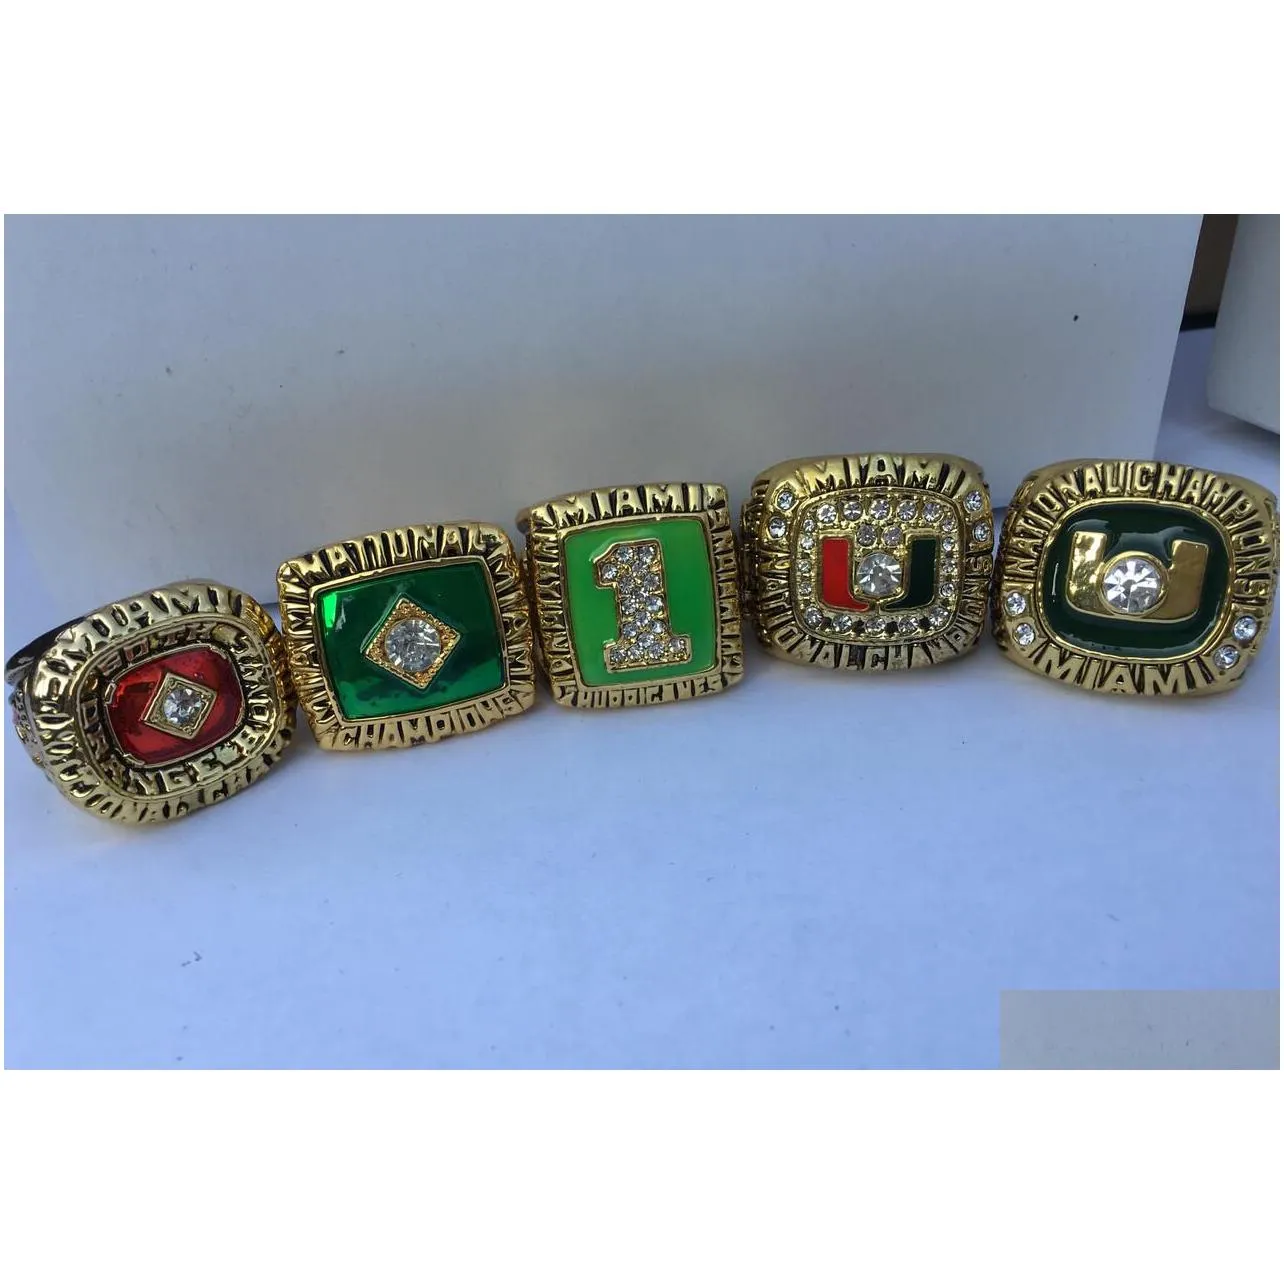 5 pcs 1983 1987 1989 1991 2001  hurricanes national championship ring set with wooden display box case fan gift 2019 drop